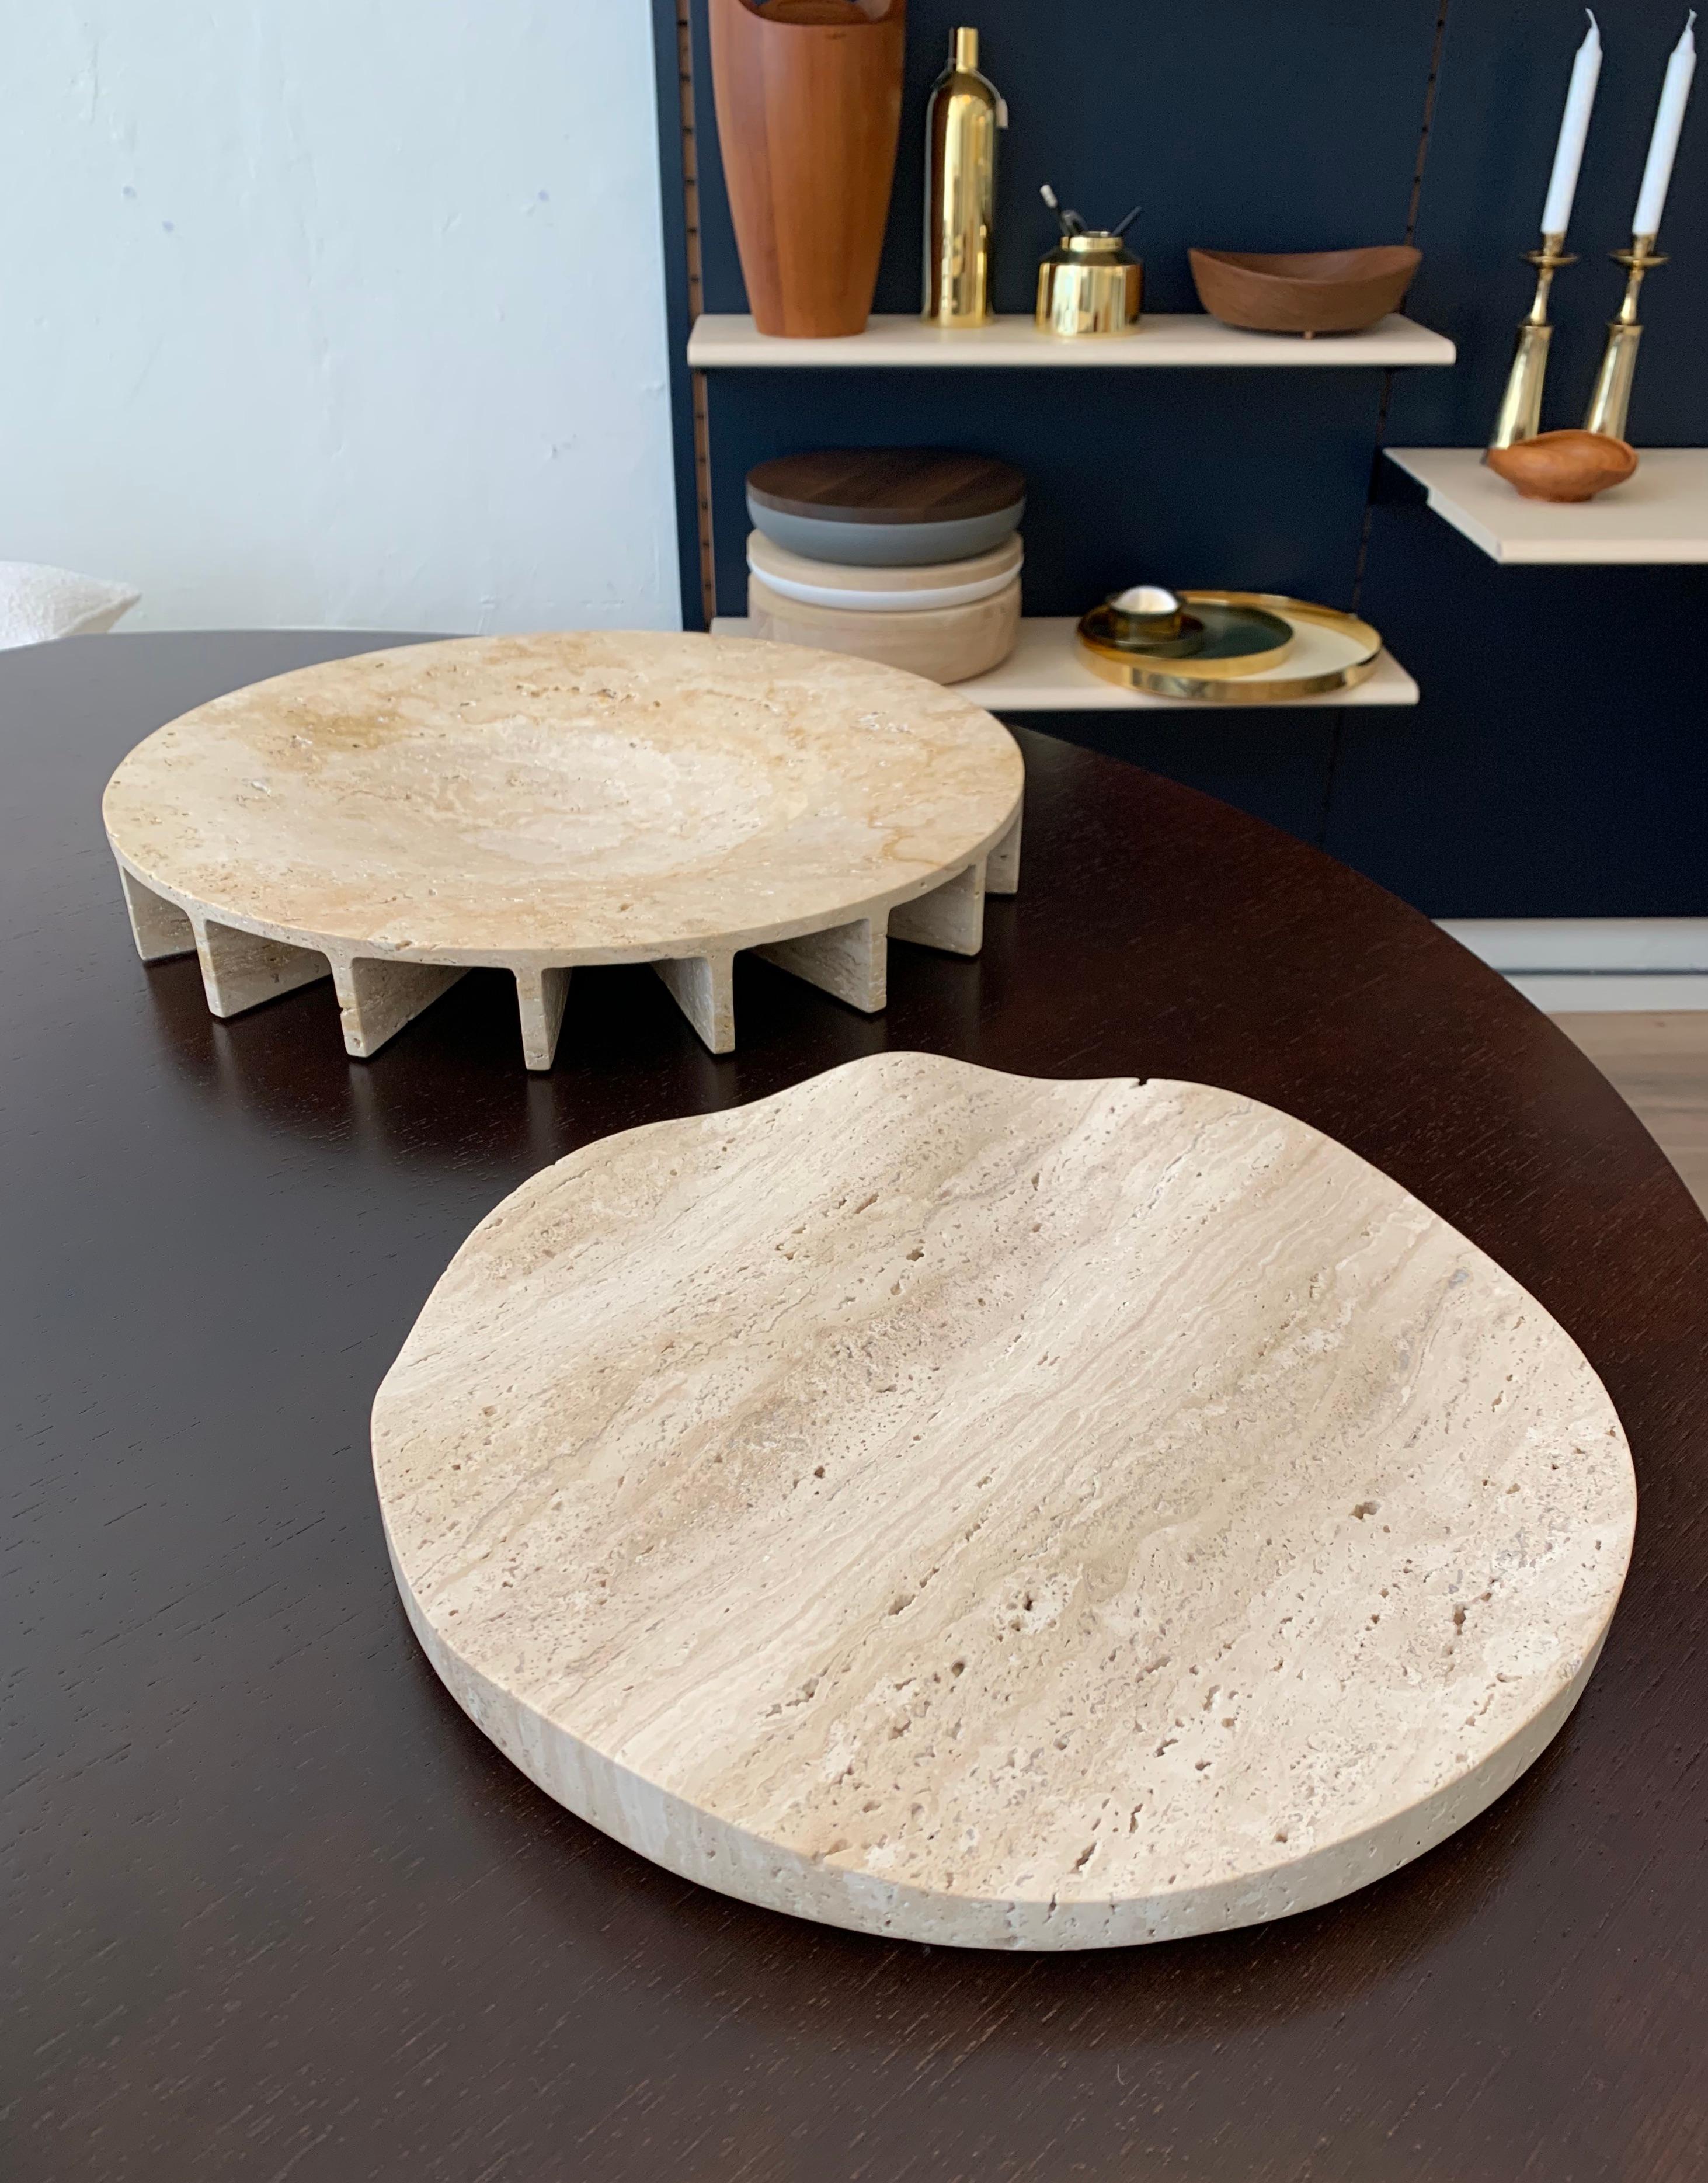 Dan Yeffet Travertine 'Ripple' Fruit Bowl by Collection Particulière 1